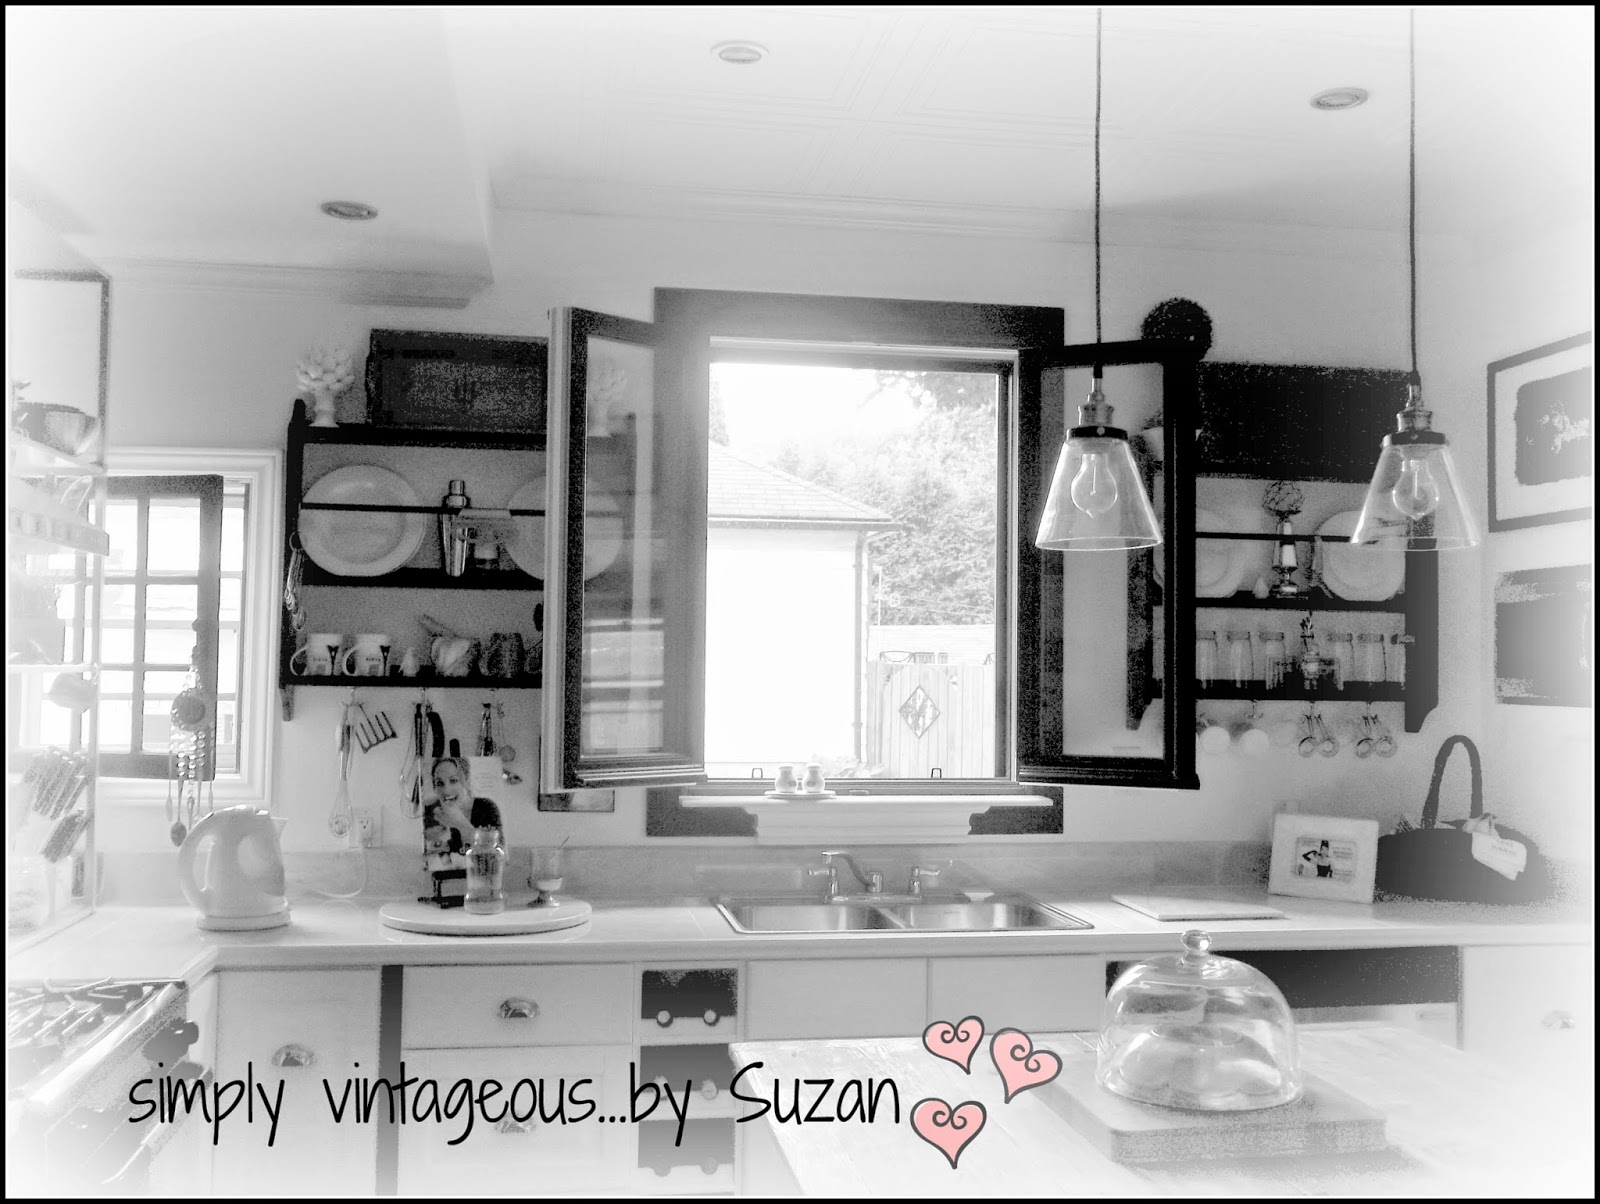 Black and White themed kitchen